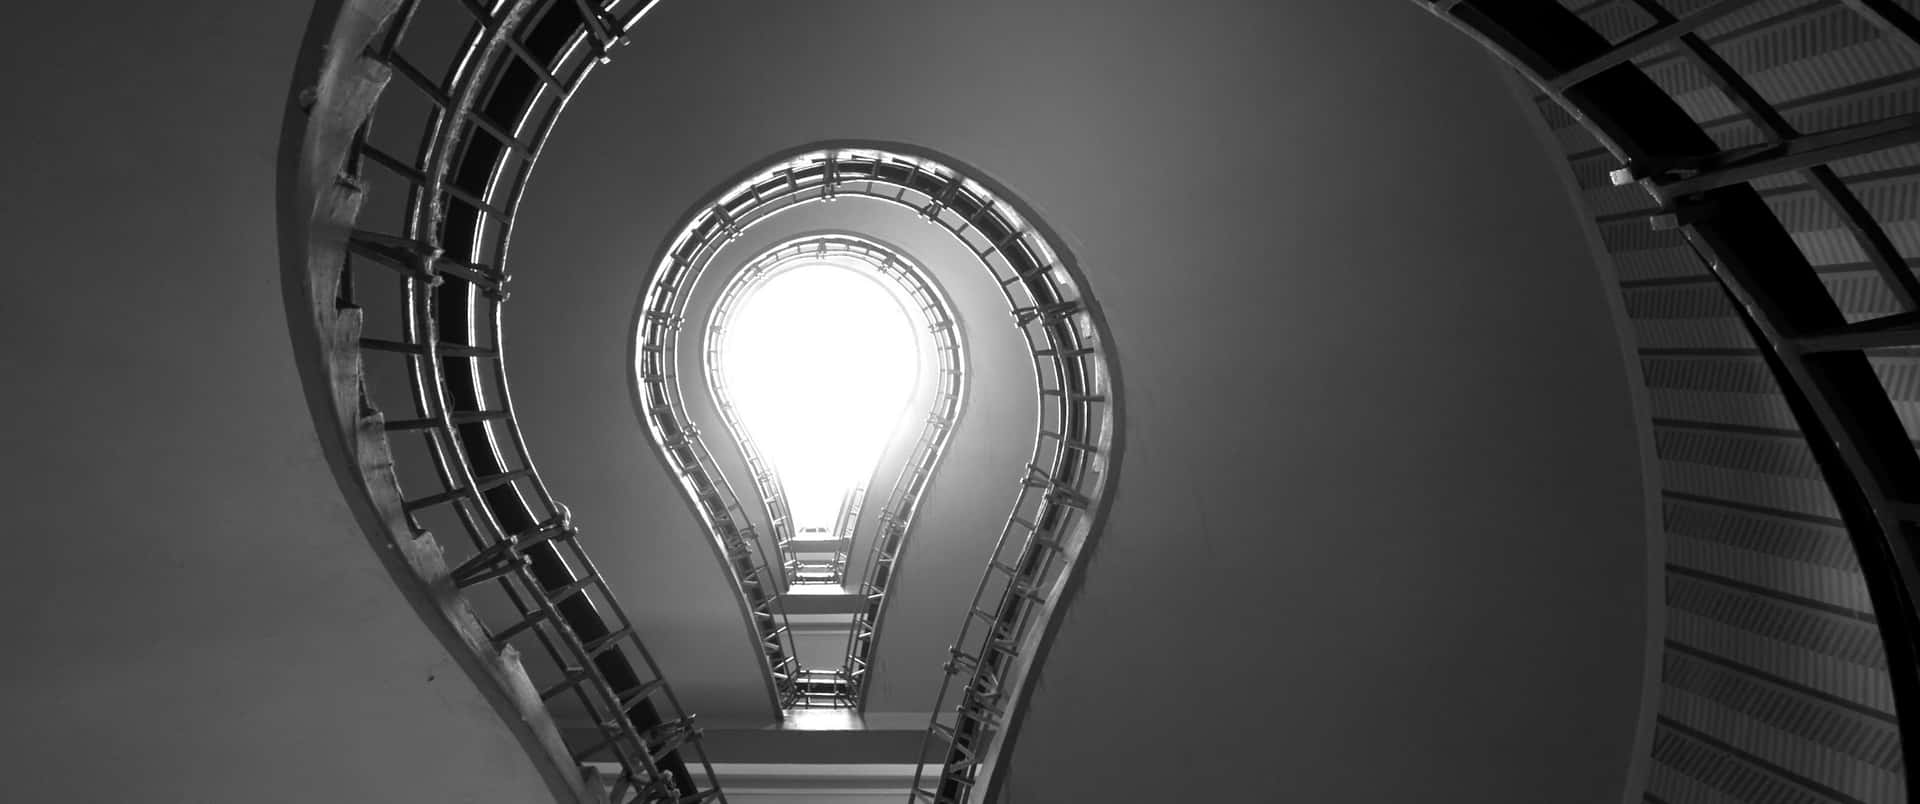 A Black And White Photo Of A Spiral Staircase